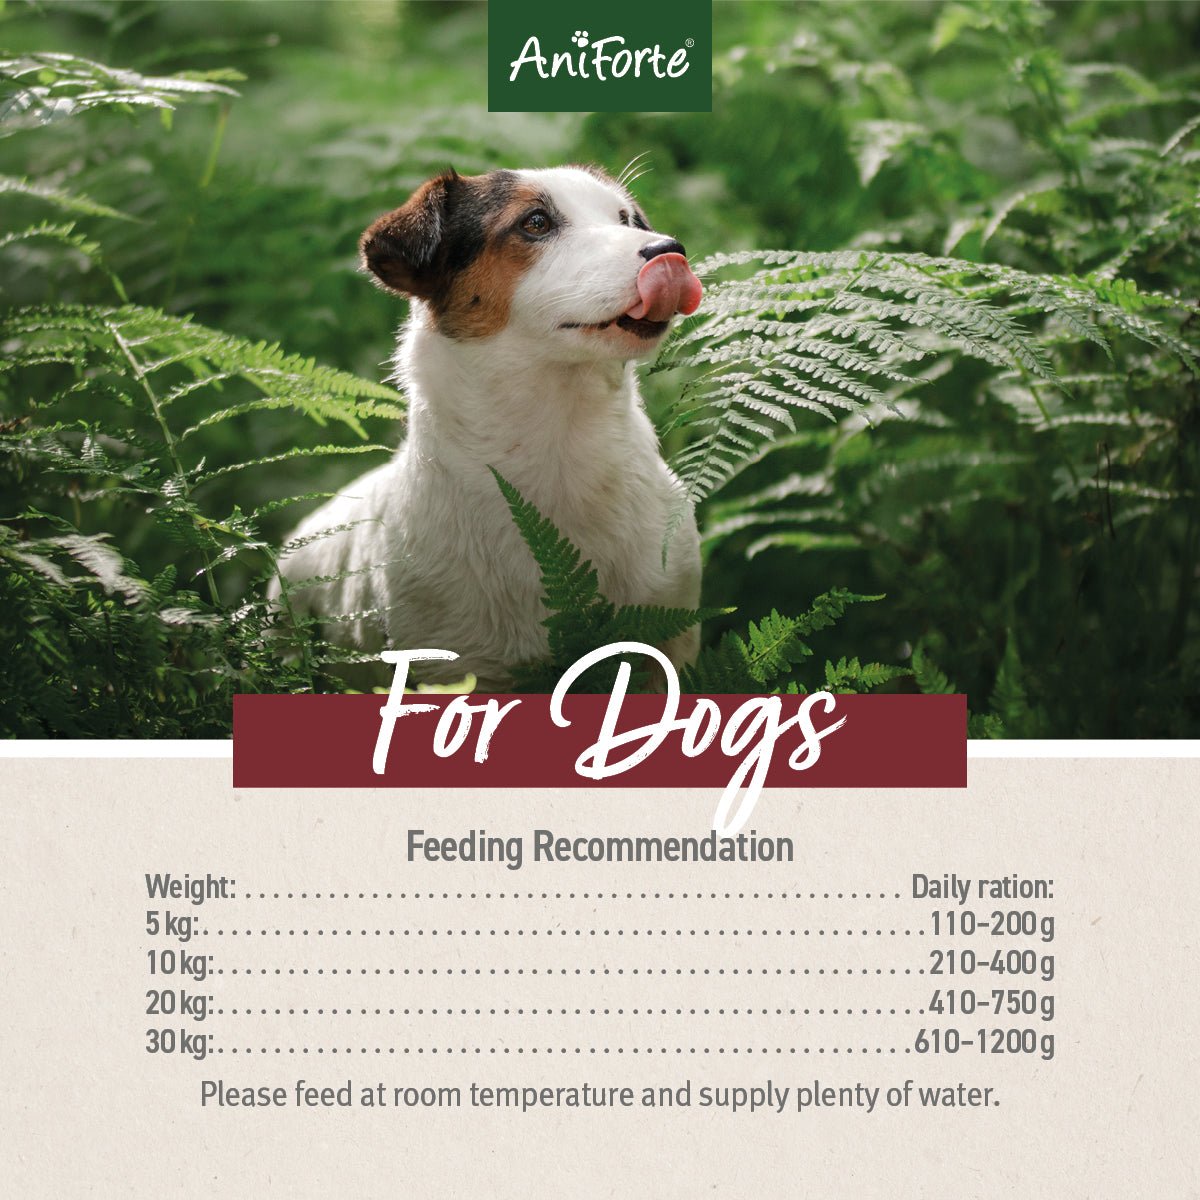 PureNature Pure Beef - Wet food for Dogs - AniForte UK